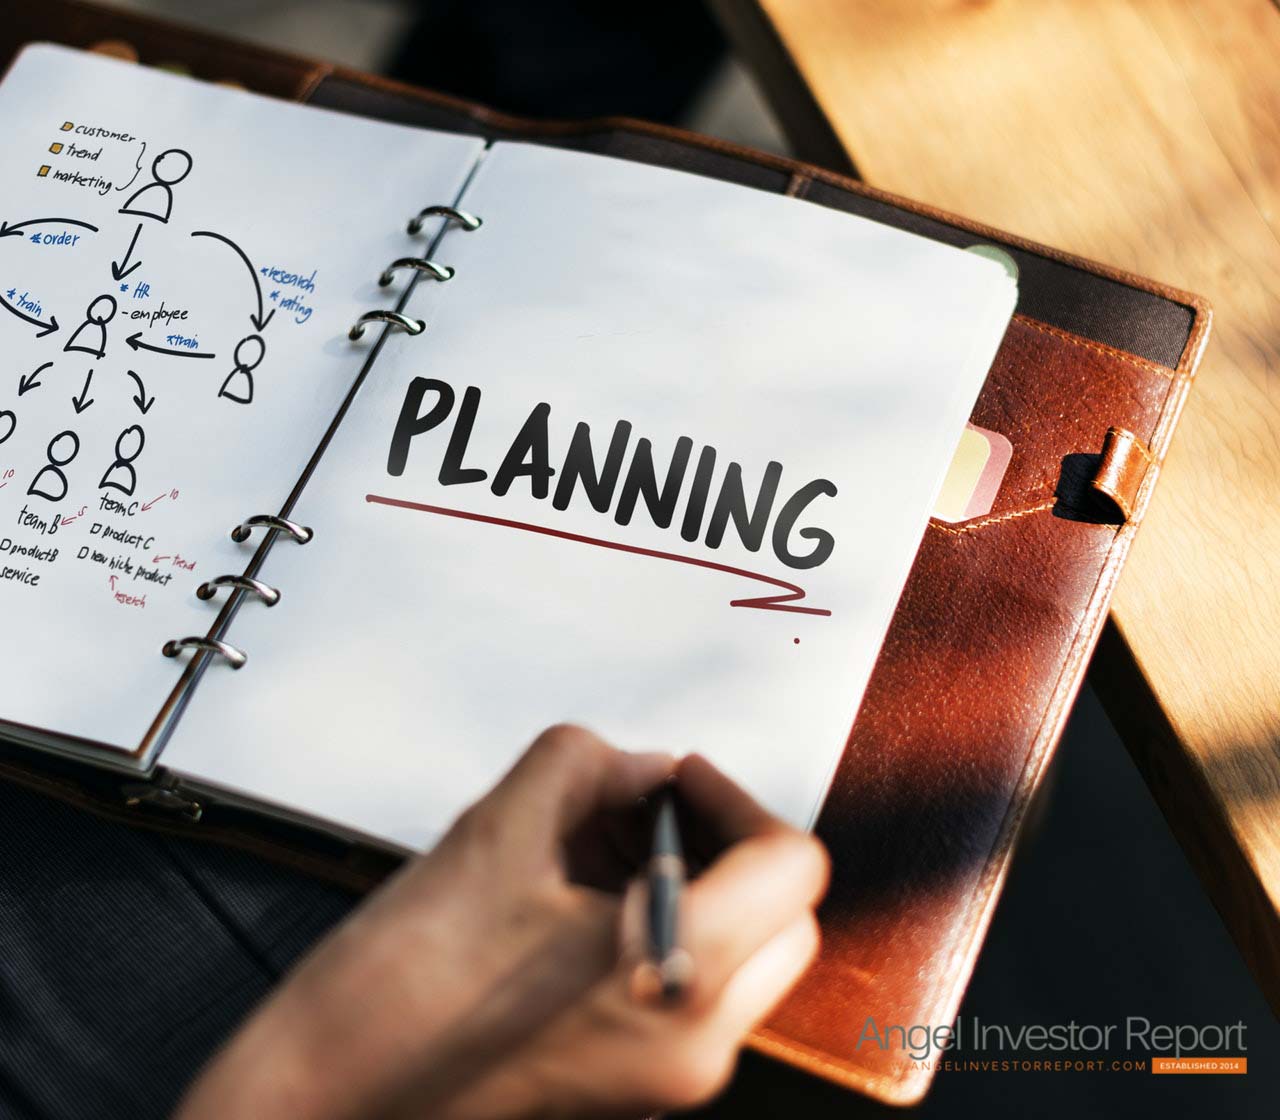 Step 24: Is Your Business Plan Ready?